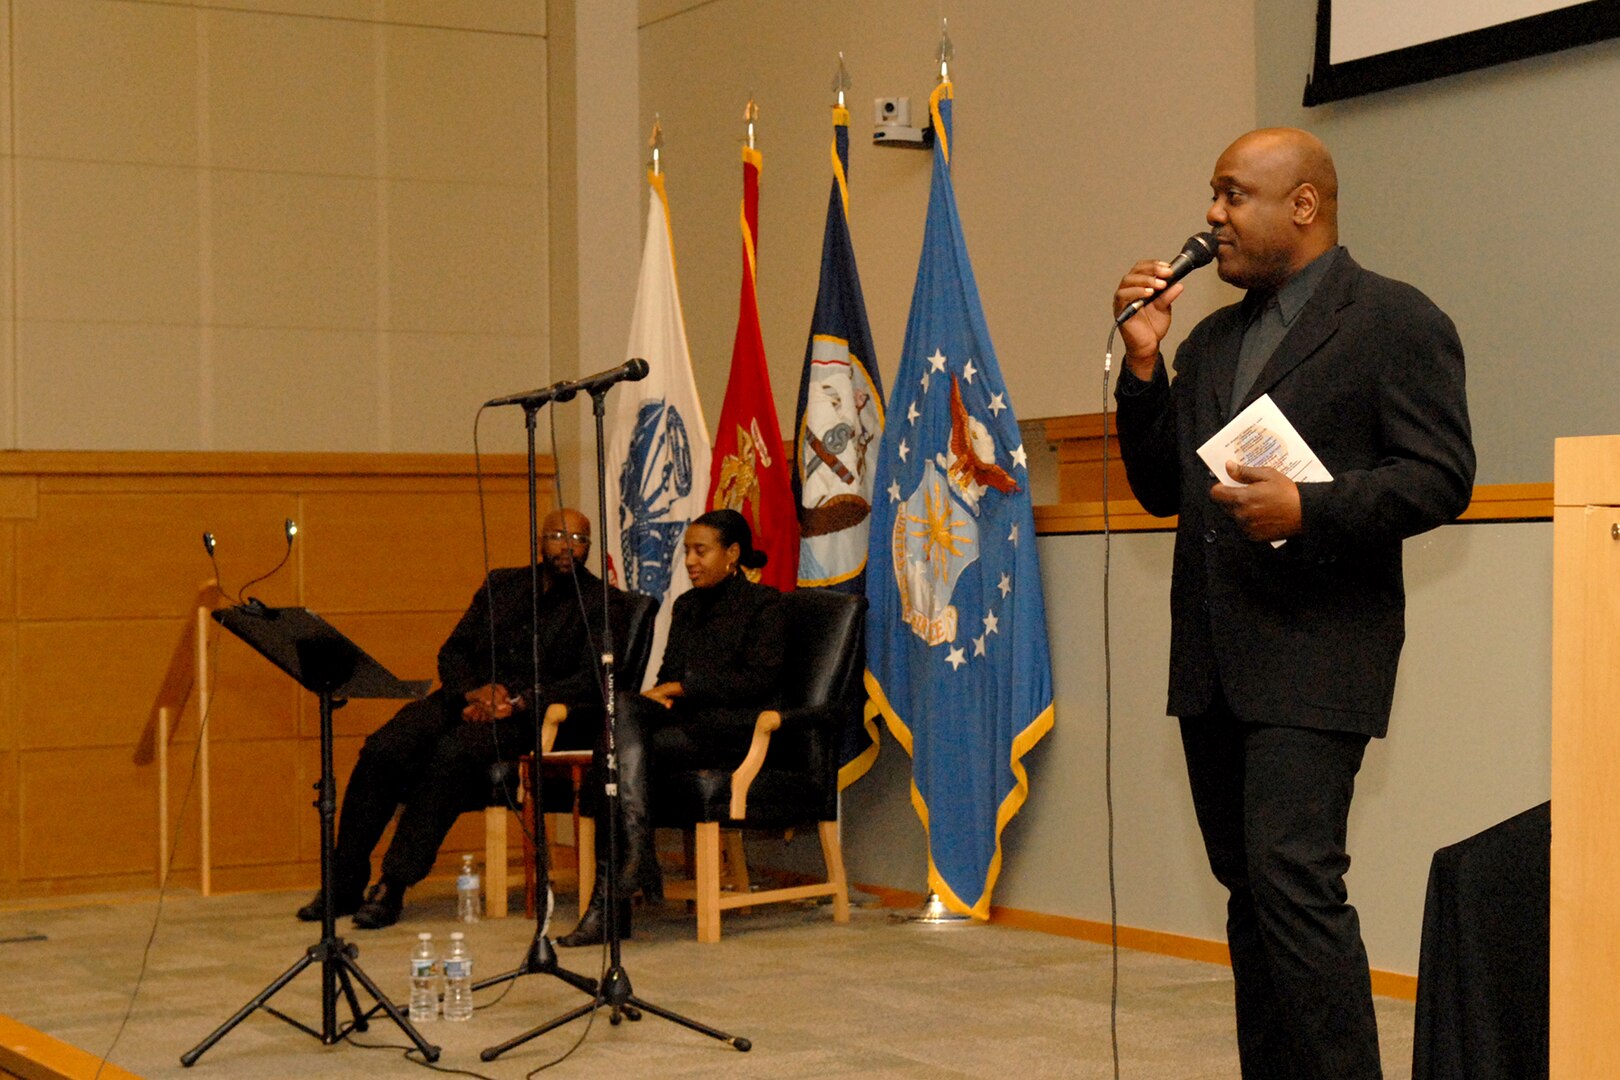 Key Arts Productions’ Joe Patterson (right) introduces a video presentation of African-Americans in times of war at Defense Logistics Agency Troop Support in Philadelphia on Feb. 28.